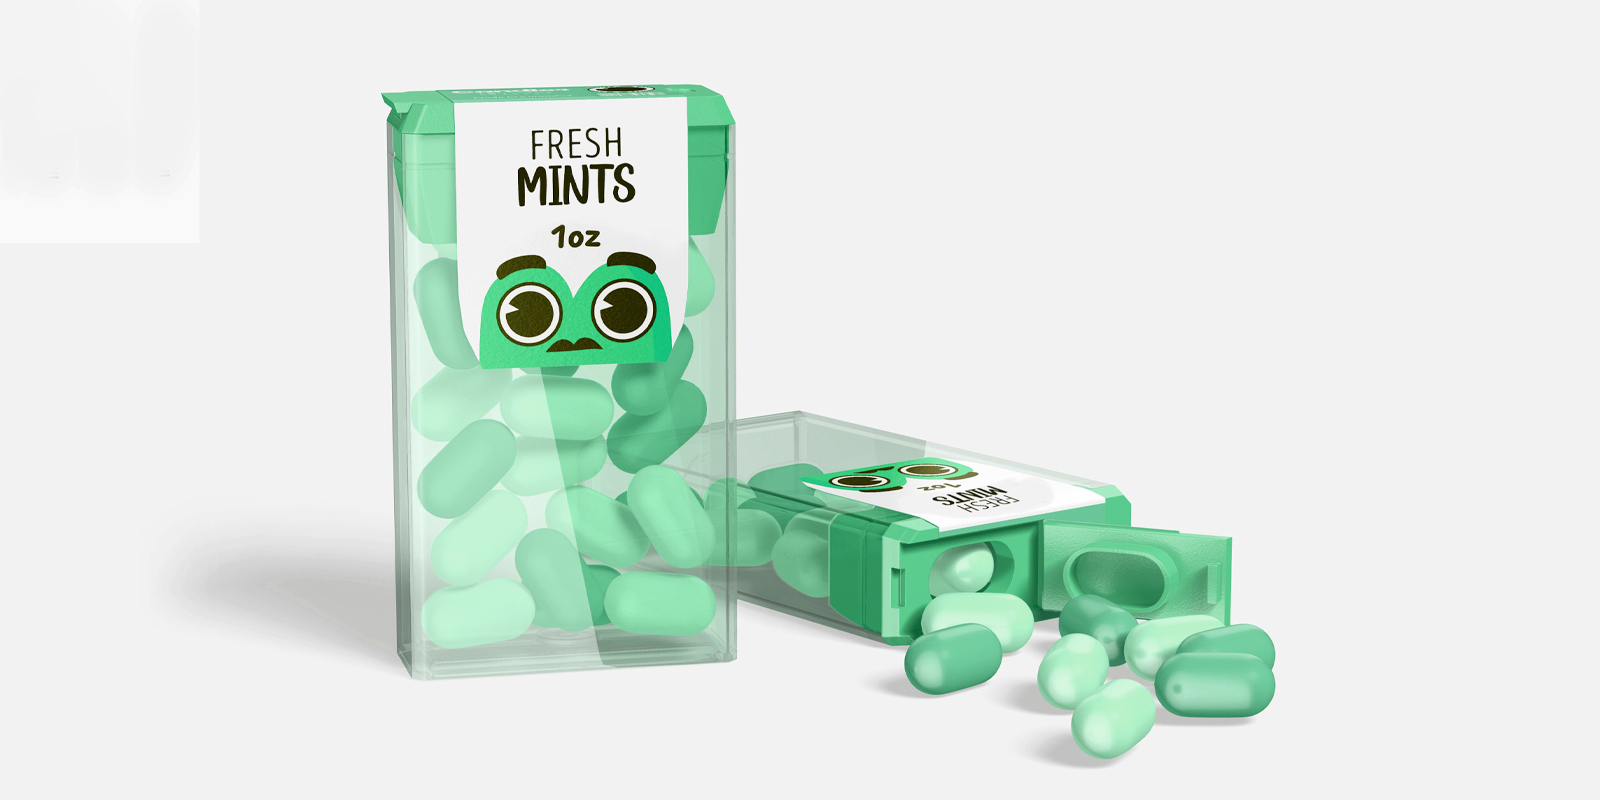 Mints in Canberra - Print with Pagerr